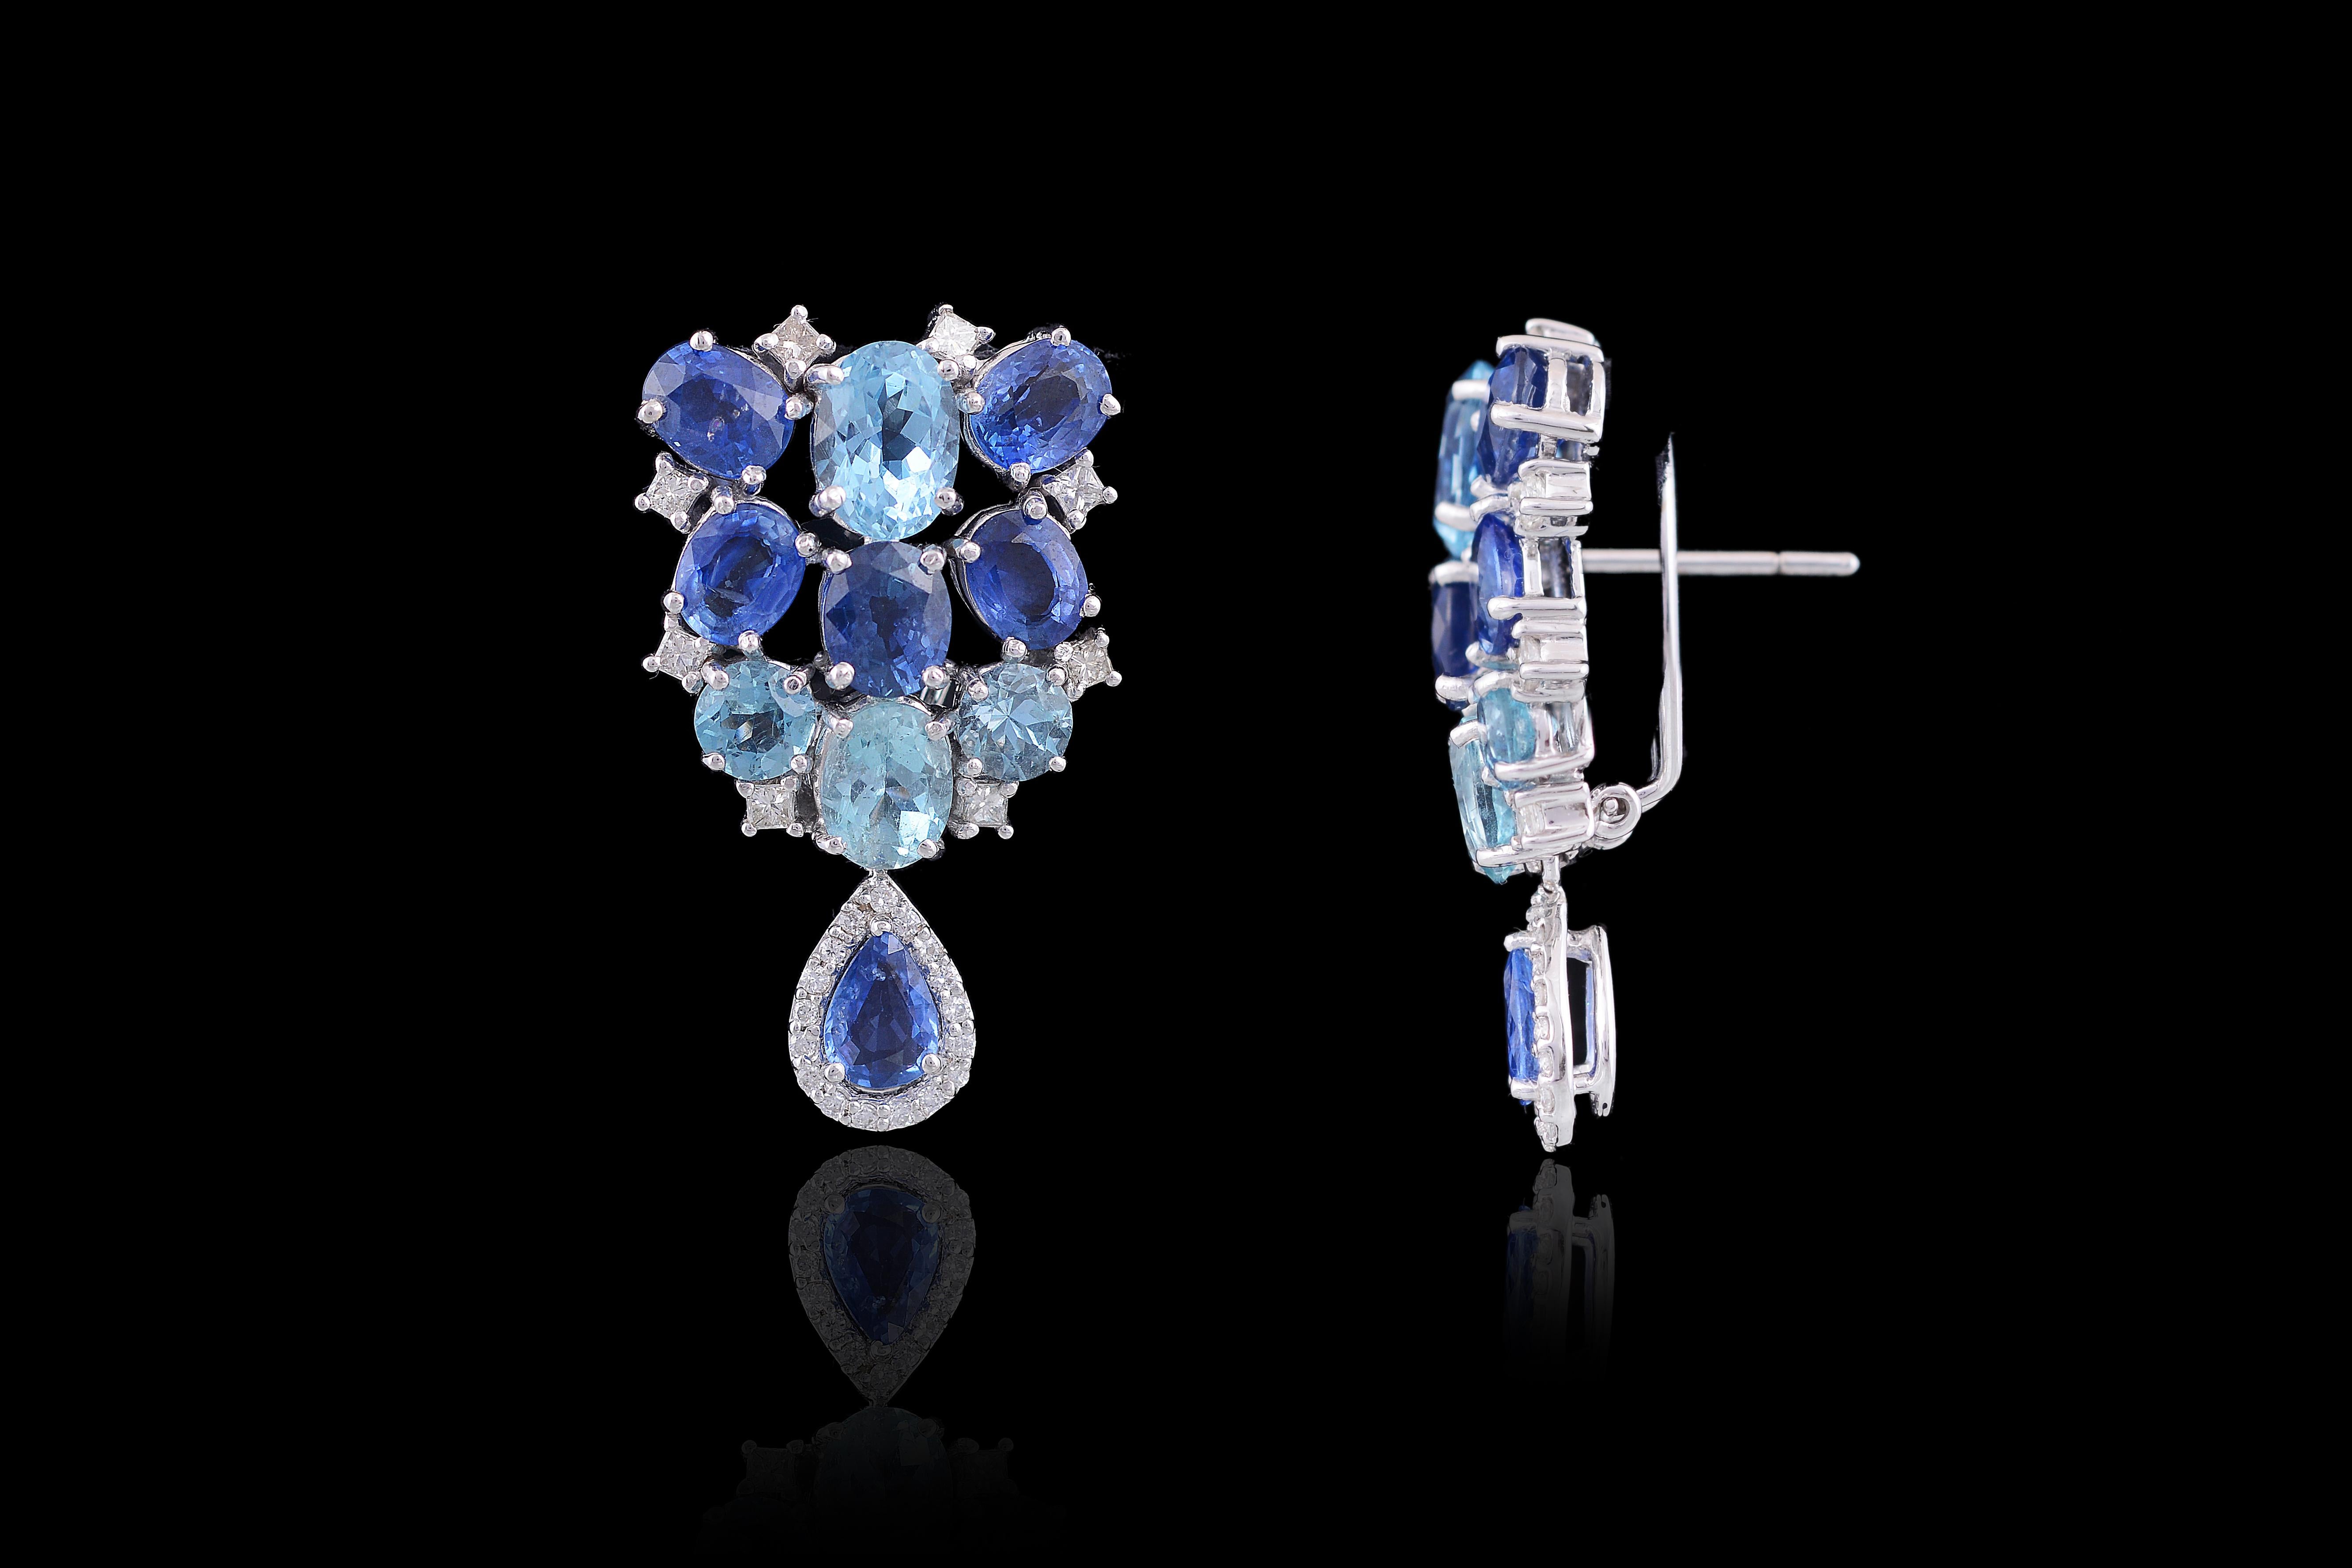 A very good looking yet unusual pair of fine earrings in Aquamarine and Ceylon Blue Sapphire with back clip and push pull backing set in 18 Karat White Gold and diamonds.